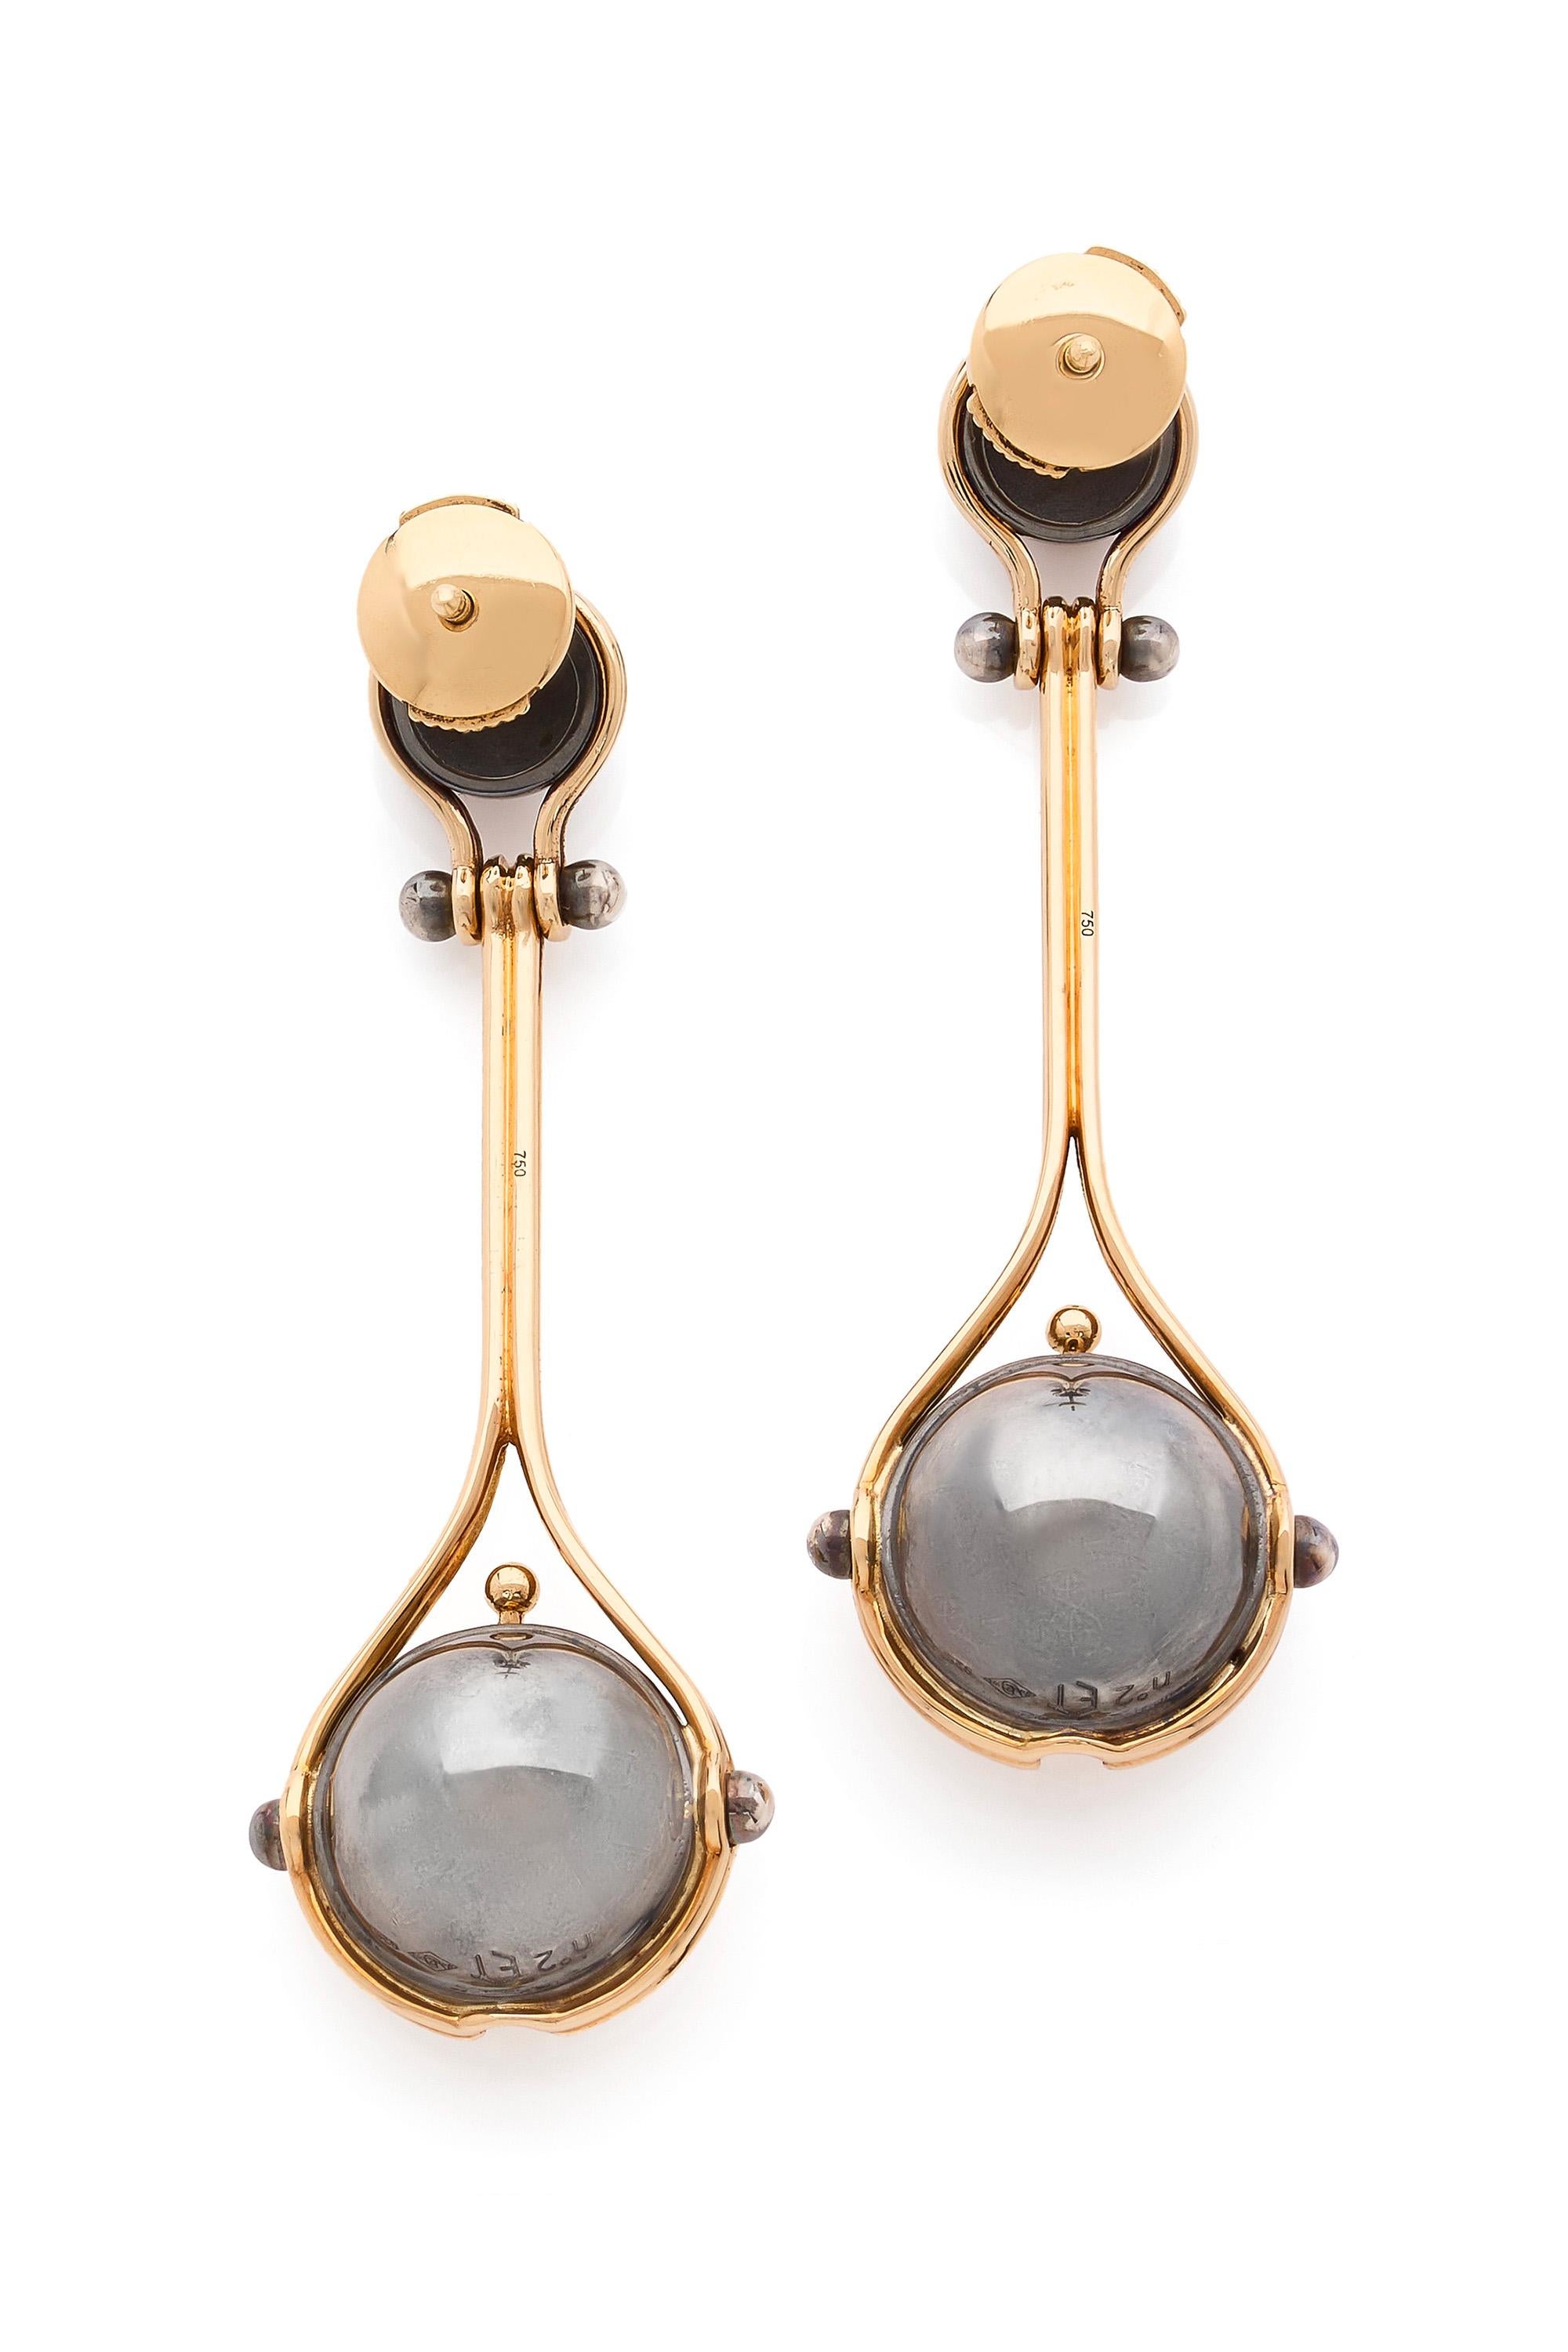 Long Akoya Pearls & Diamond Pluton Earrings in 18k Yellow Gold by Elie Top In New Condition For Sale In Paris, France